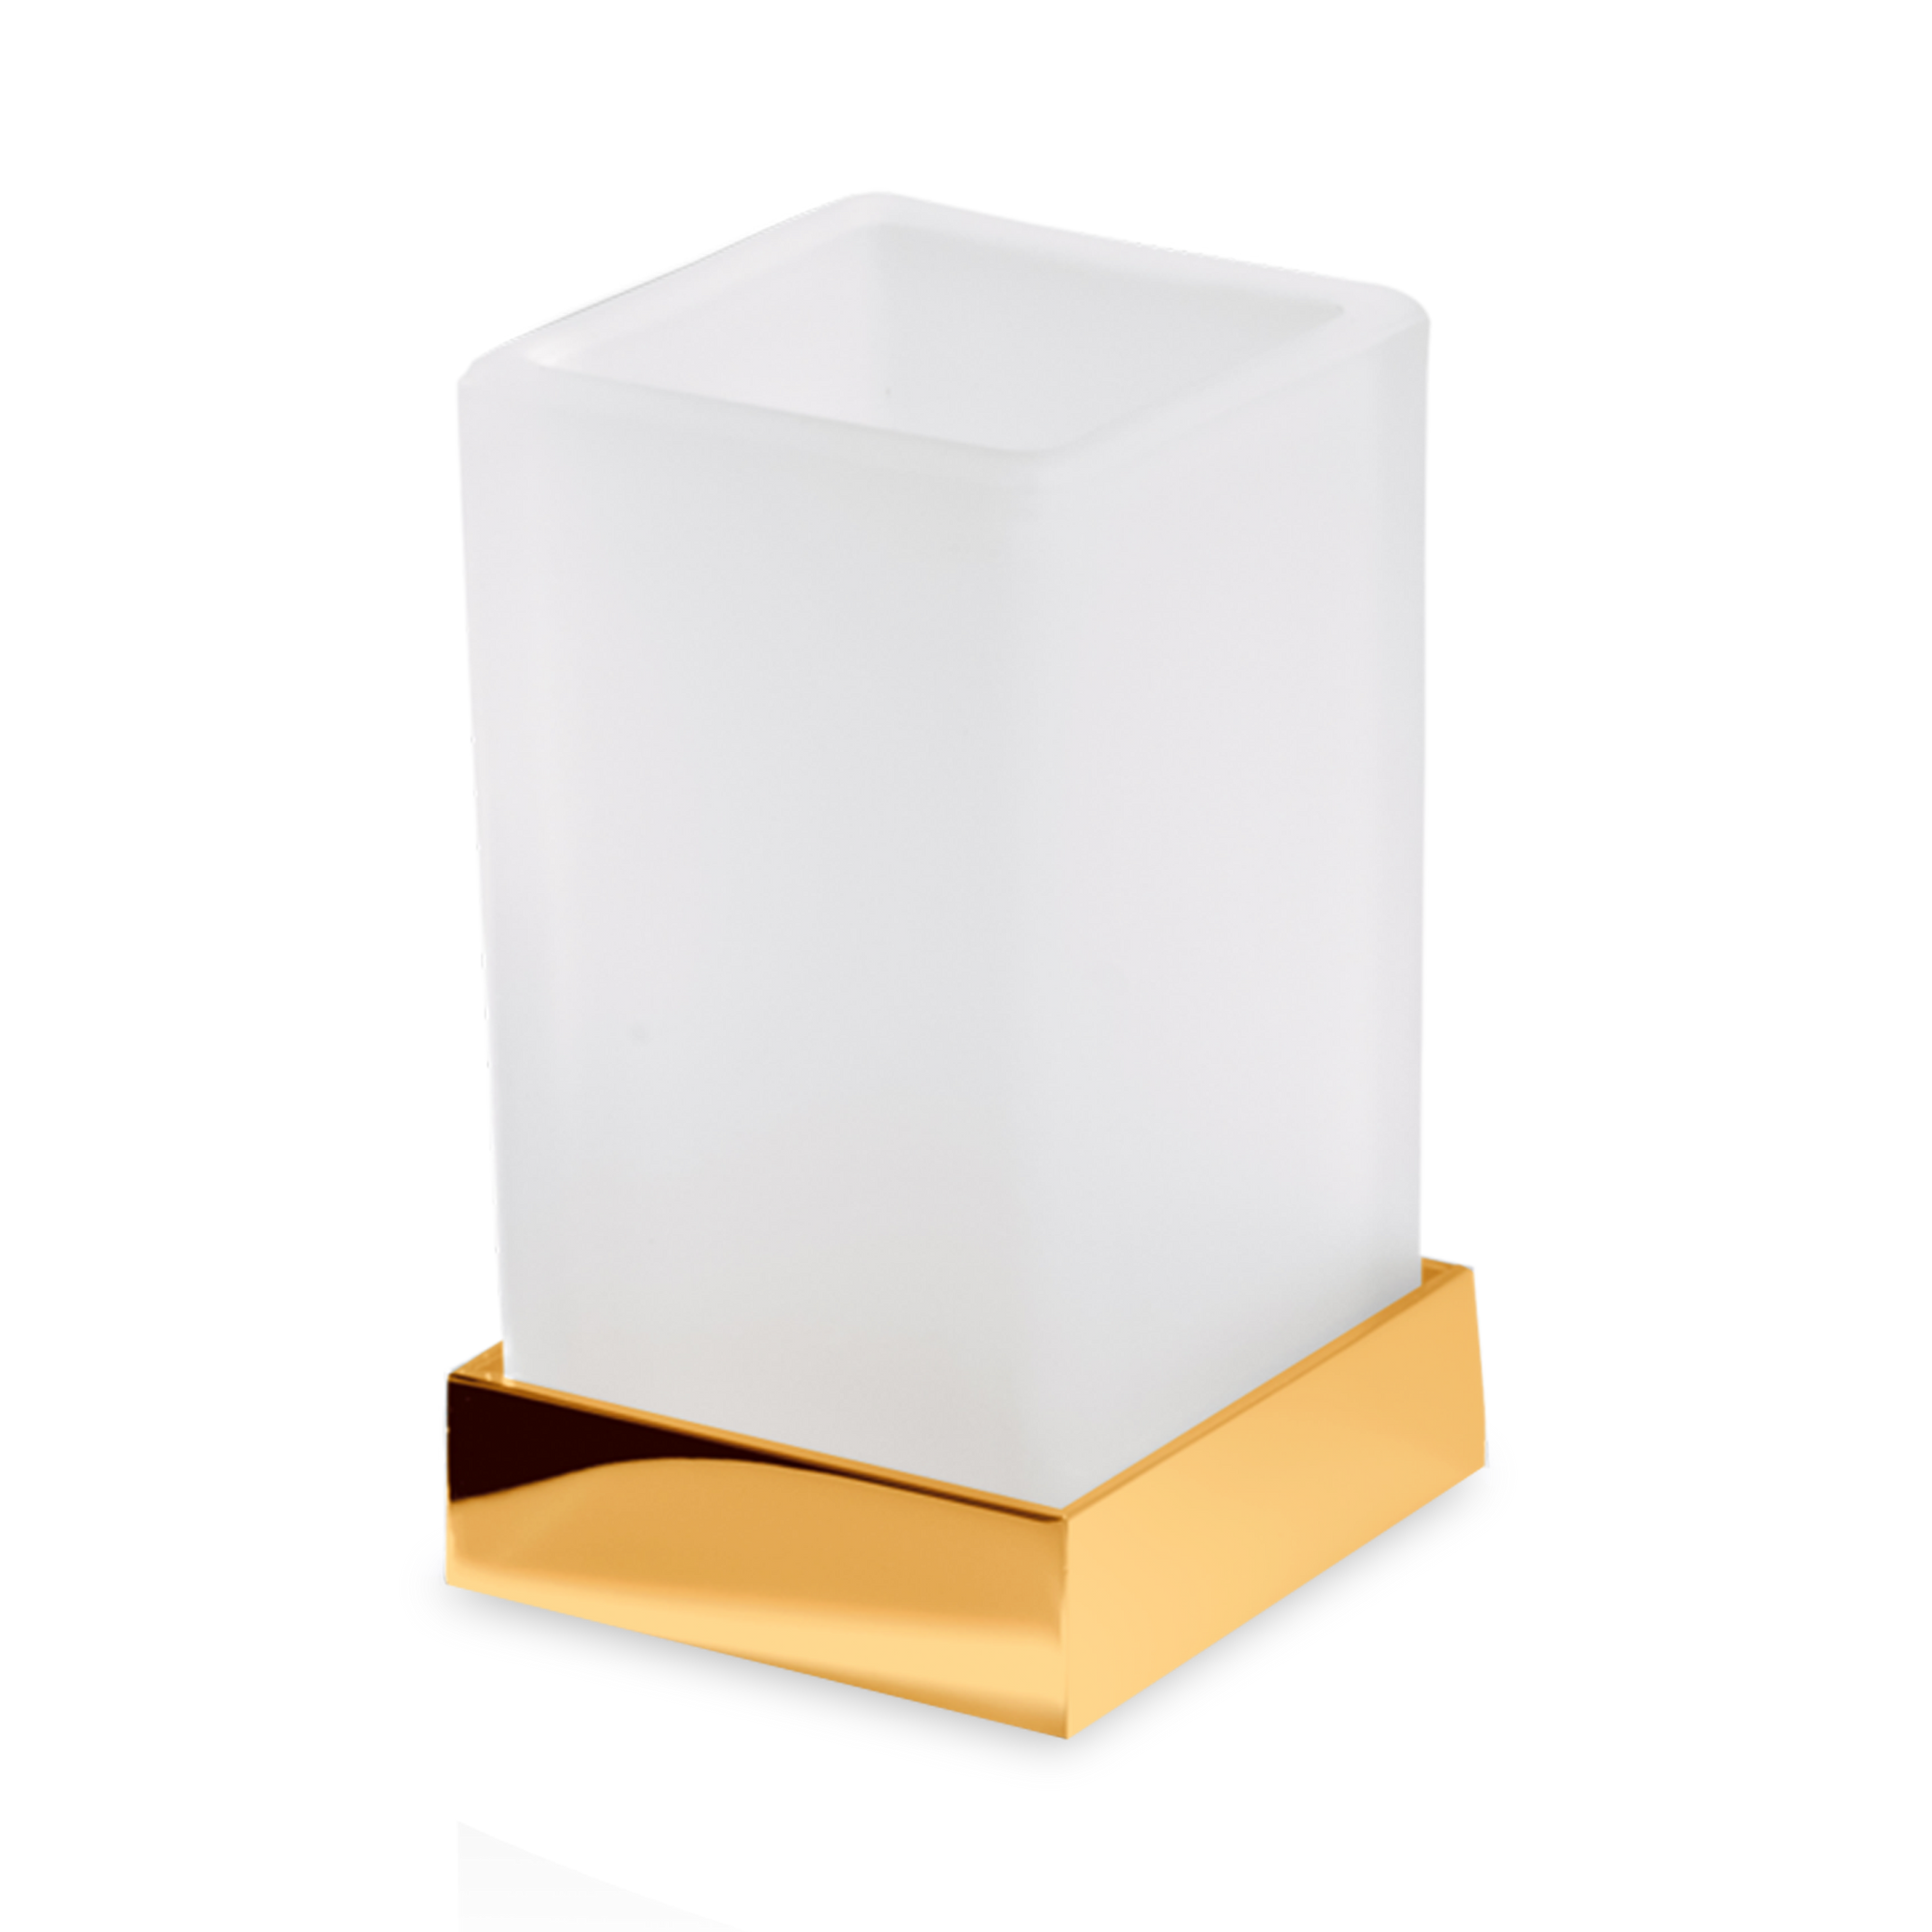 Square tumbler with a classic modern styling, crafted in satin glass with a gold accent.